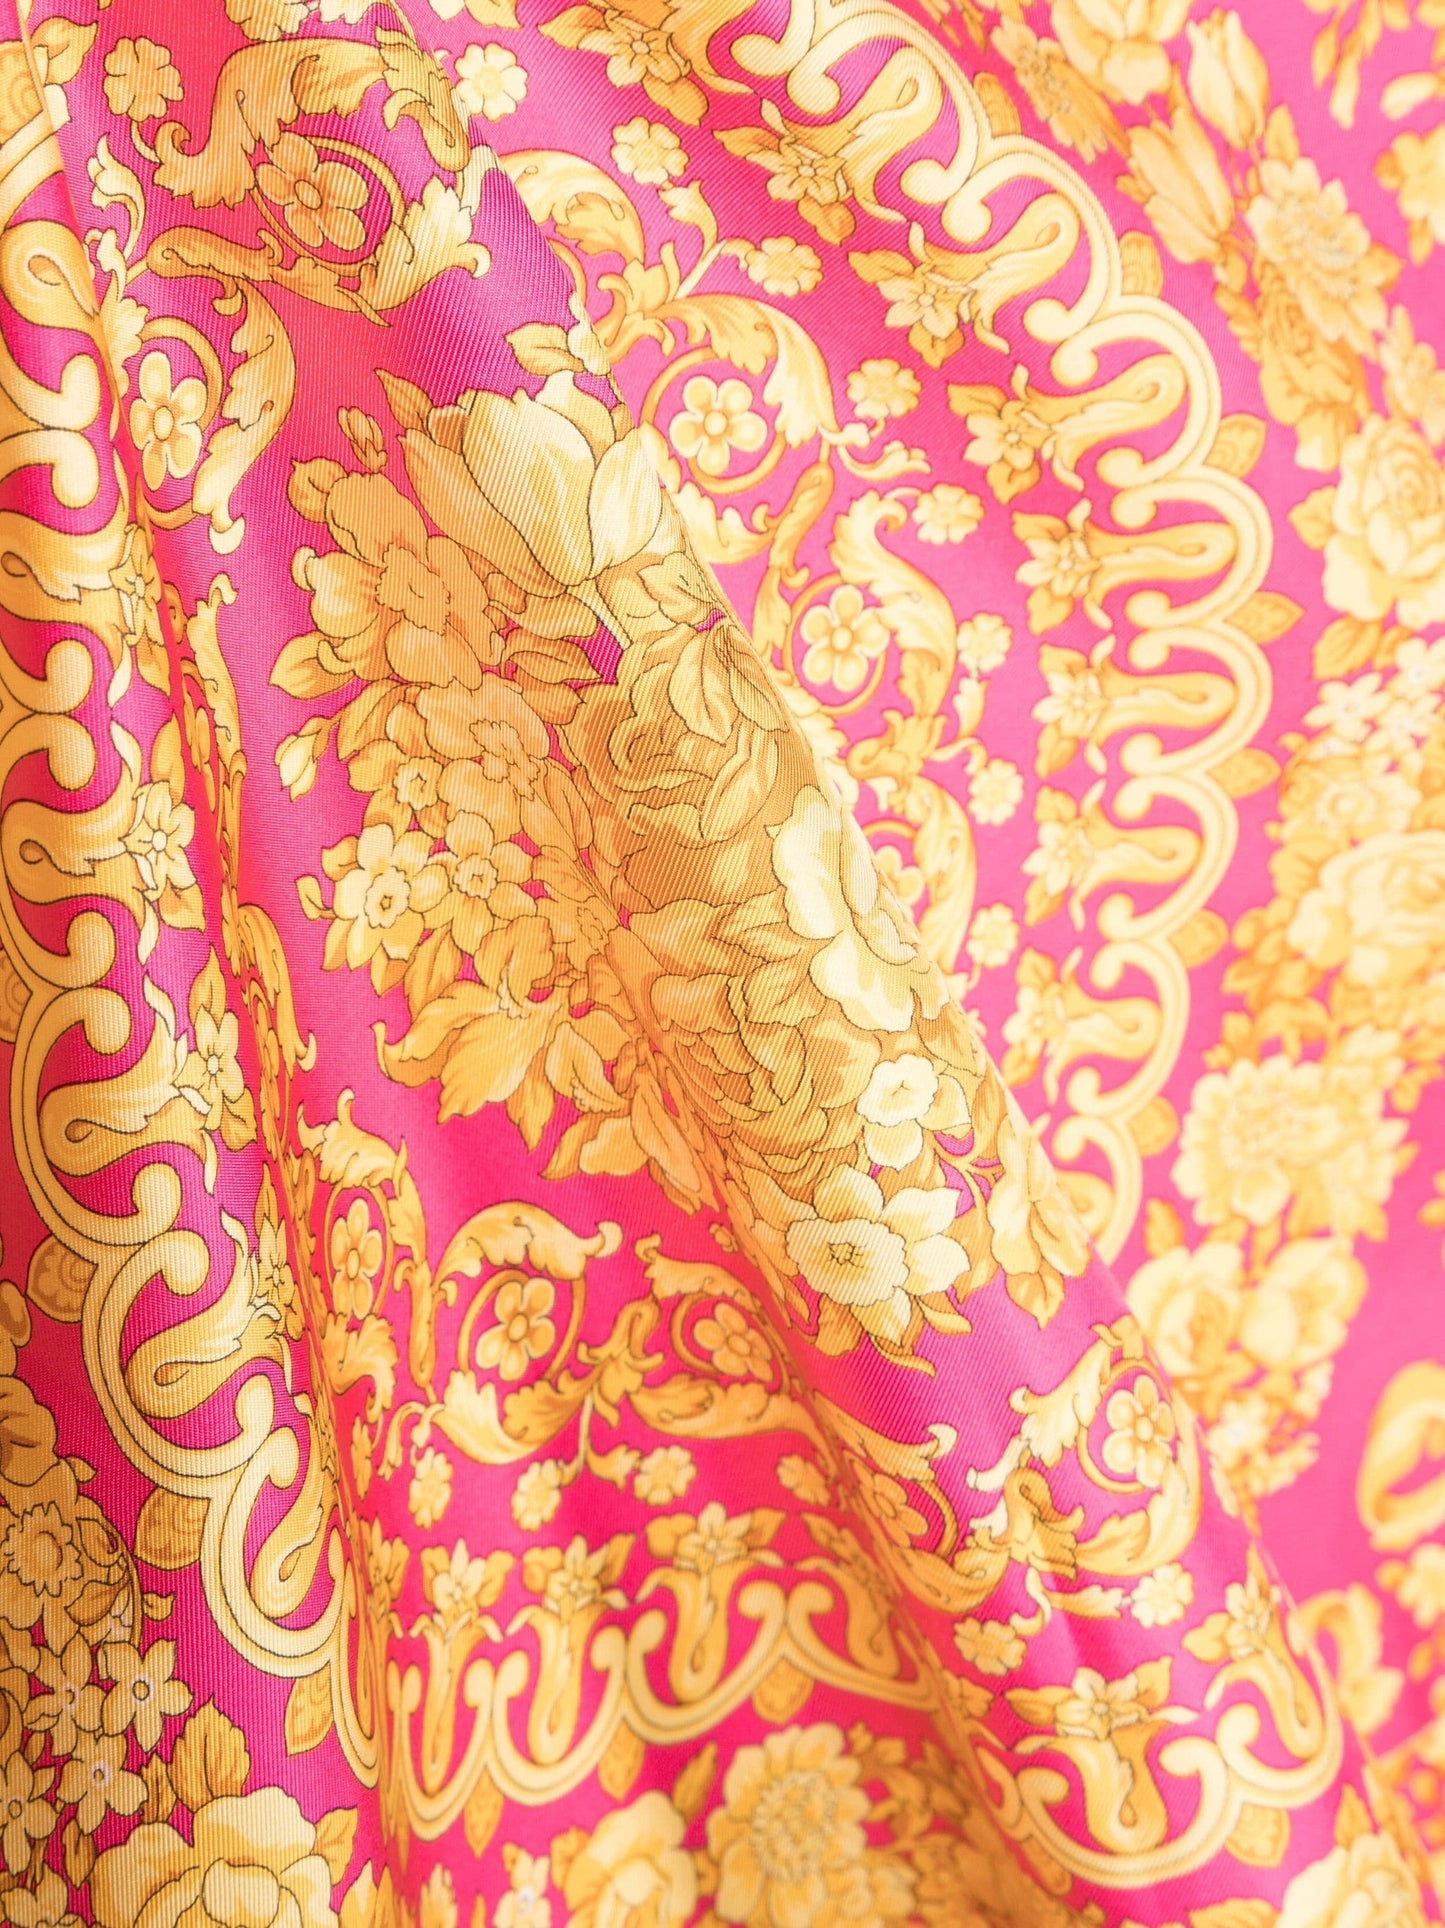 Versace Pink and Gold Baroque Silk Scarf